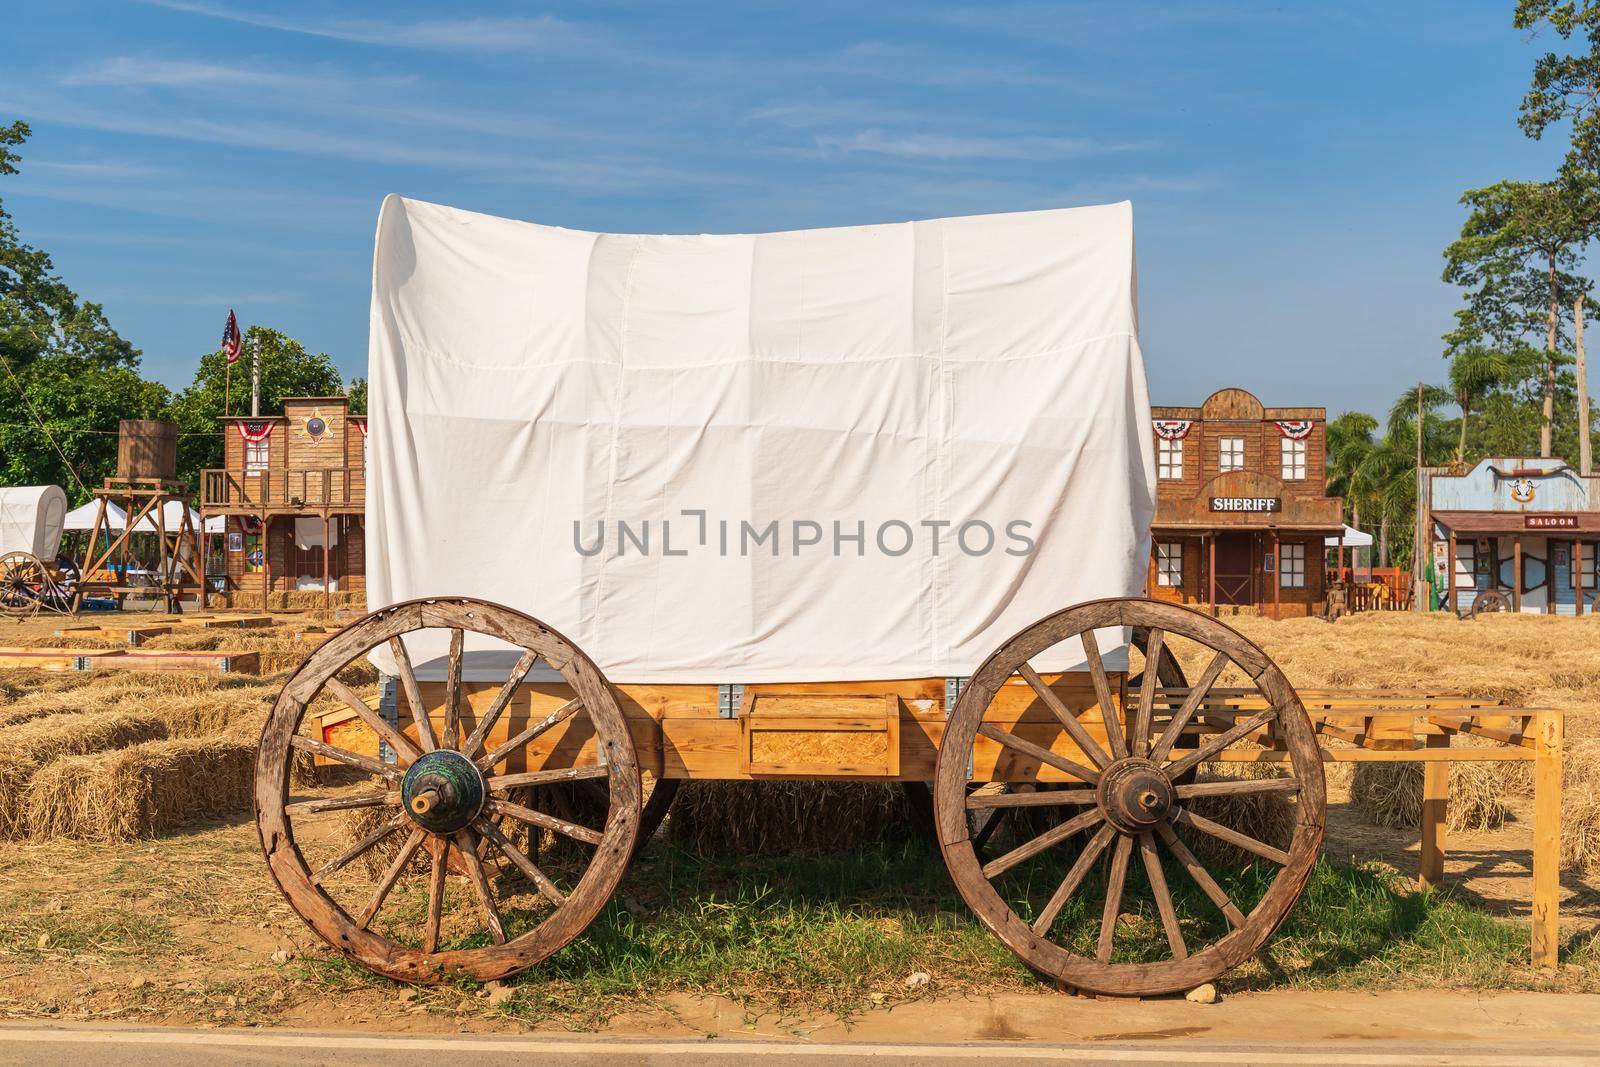 Antique covered wagon in the old west city